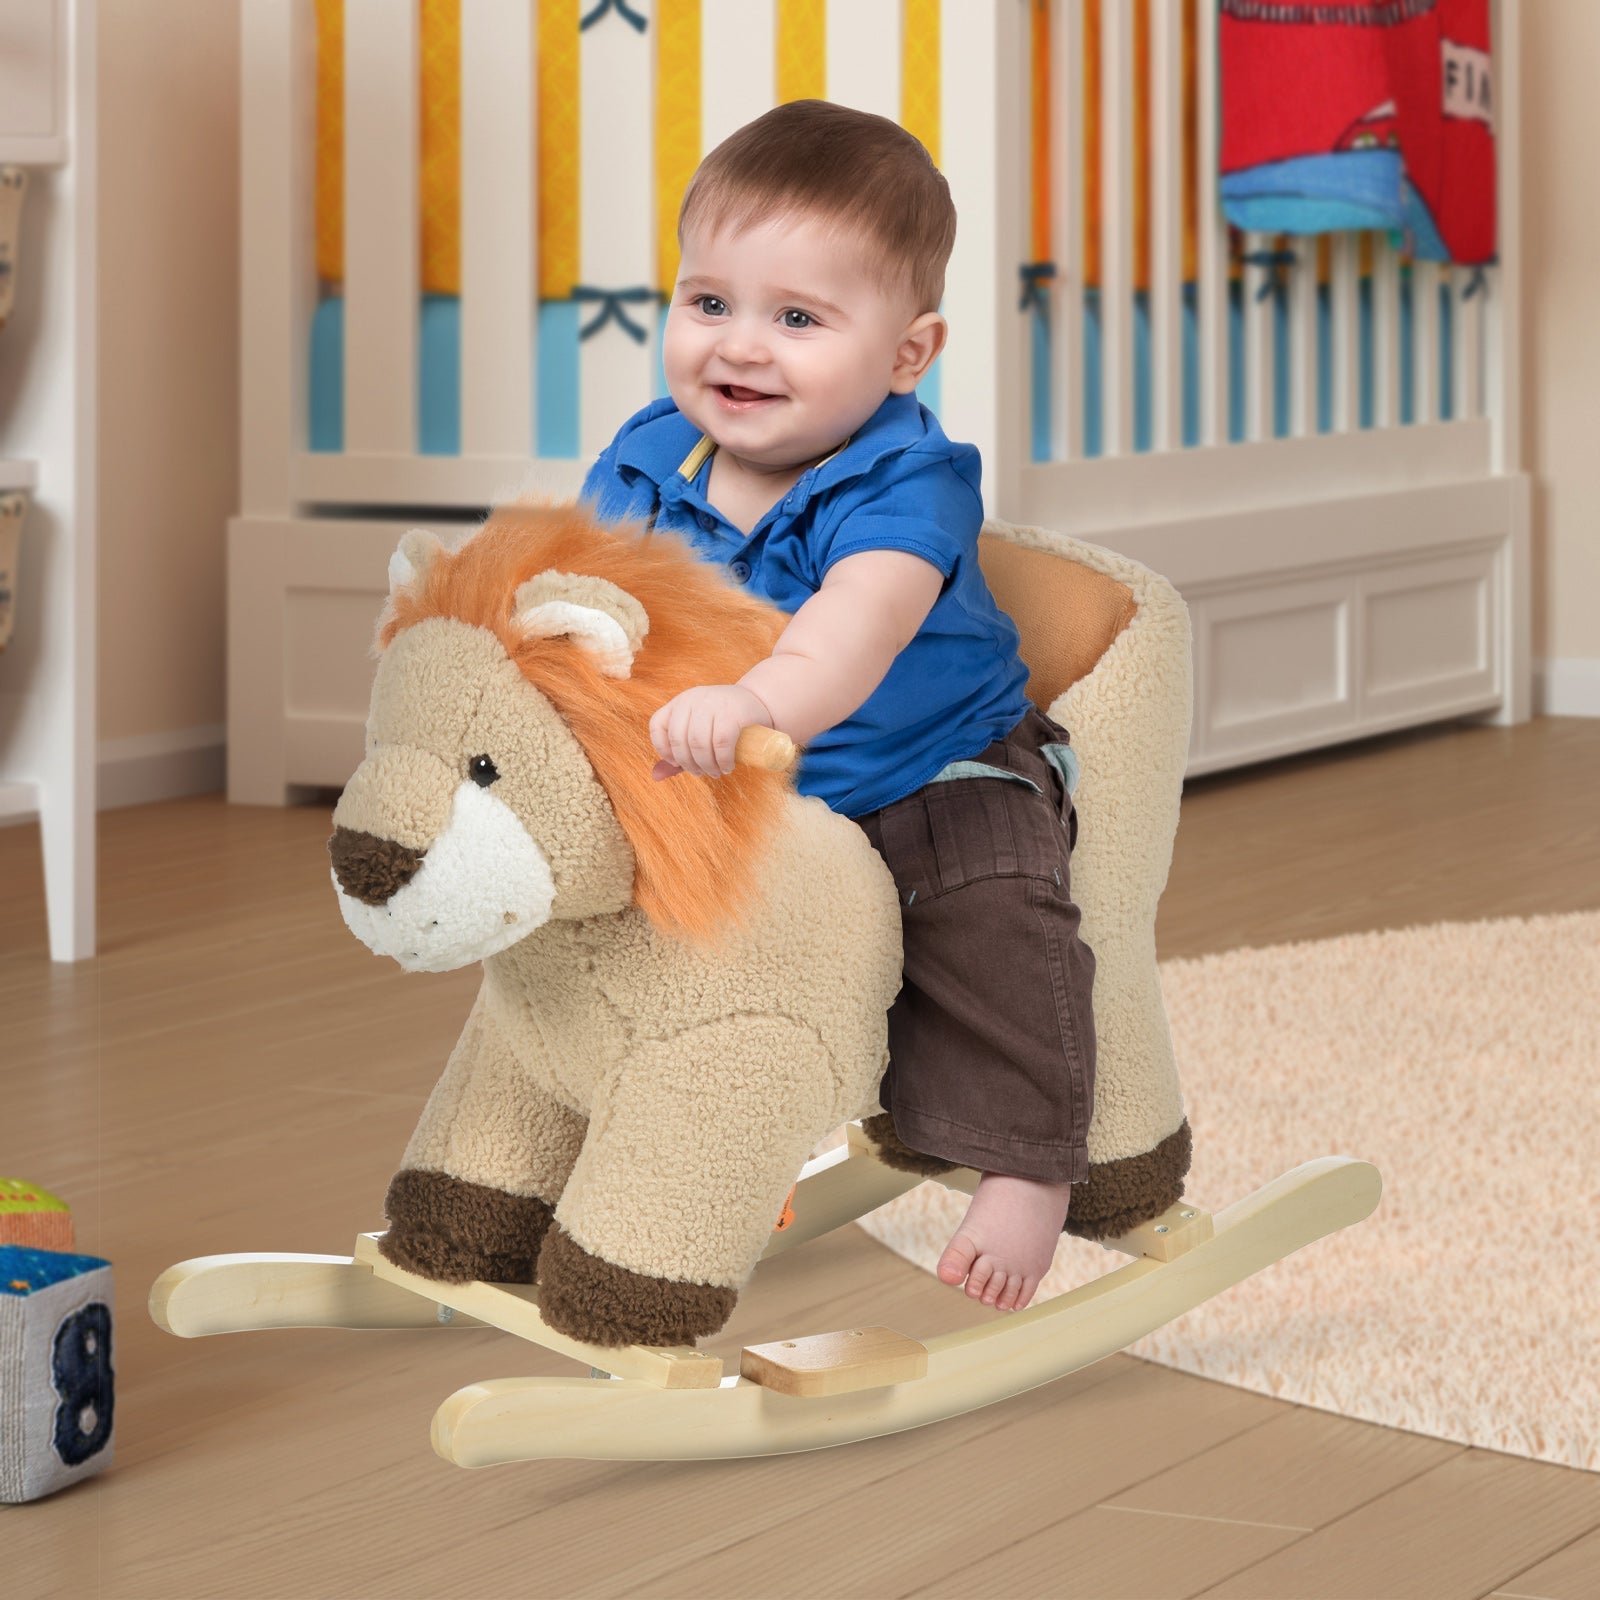 Baby Rocking Horse Lion Design Plush Stuffed Rocking Chair, Wooden Rocking Horse with Sound, Seat Belt for 18-36 Months Boys and Girls Gift, Brown at Gallery Canada